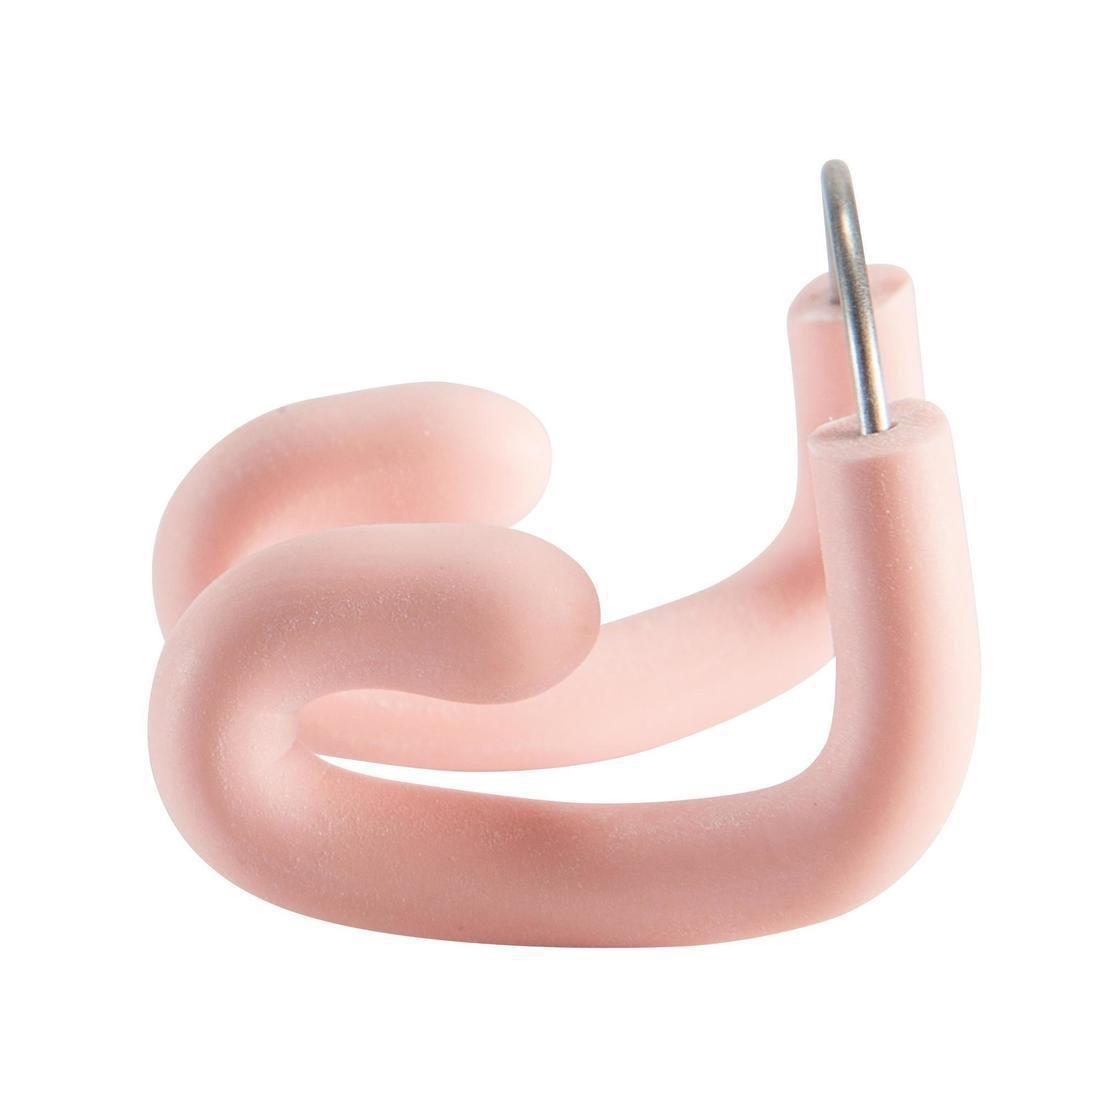 NABAIJI - Swimming Adjustable Stainless Steel-Latex Nose Clip, Fluo Pale Peach